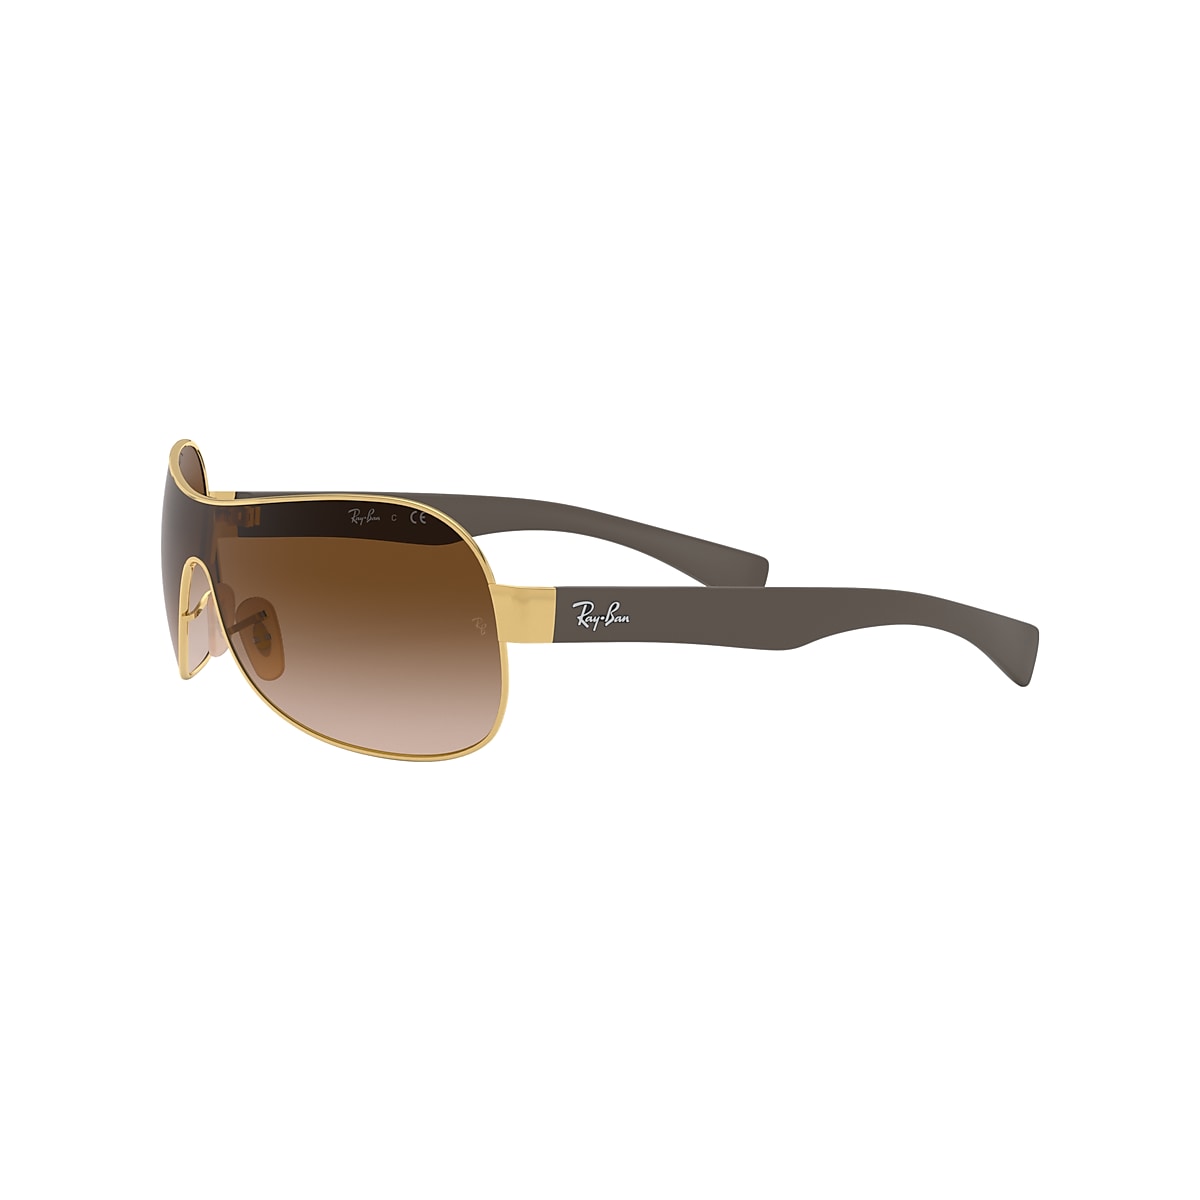 RB3471 Sunglasses in Gold and Brown - RB3471 | Ray-Ban® US